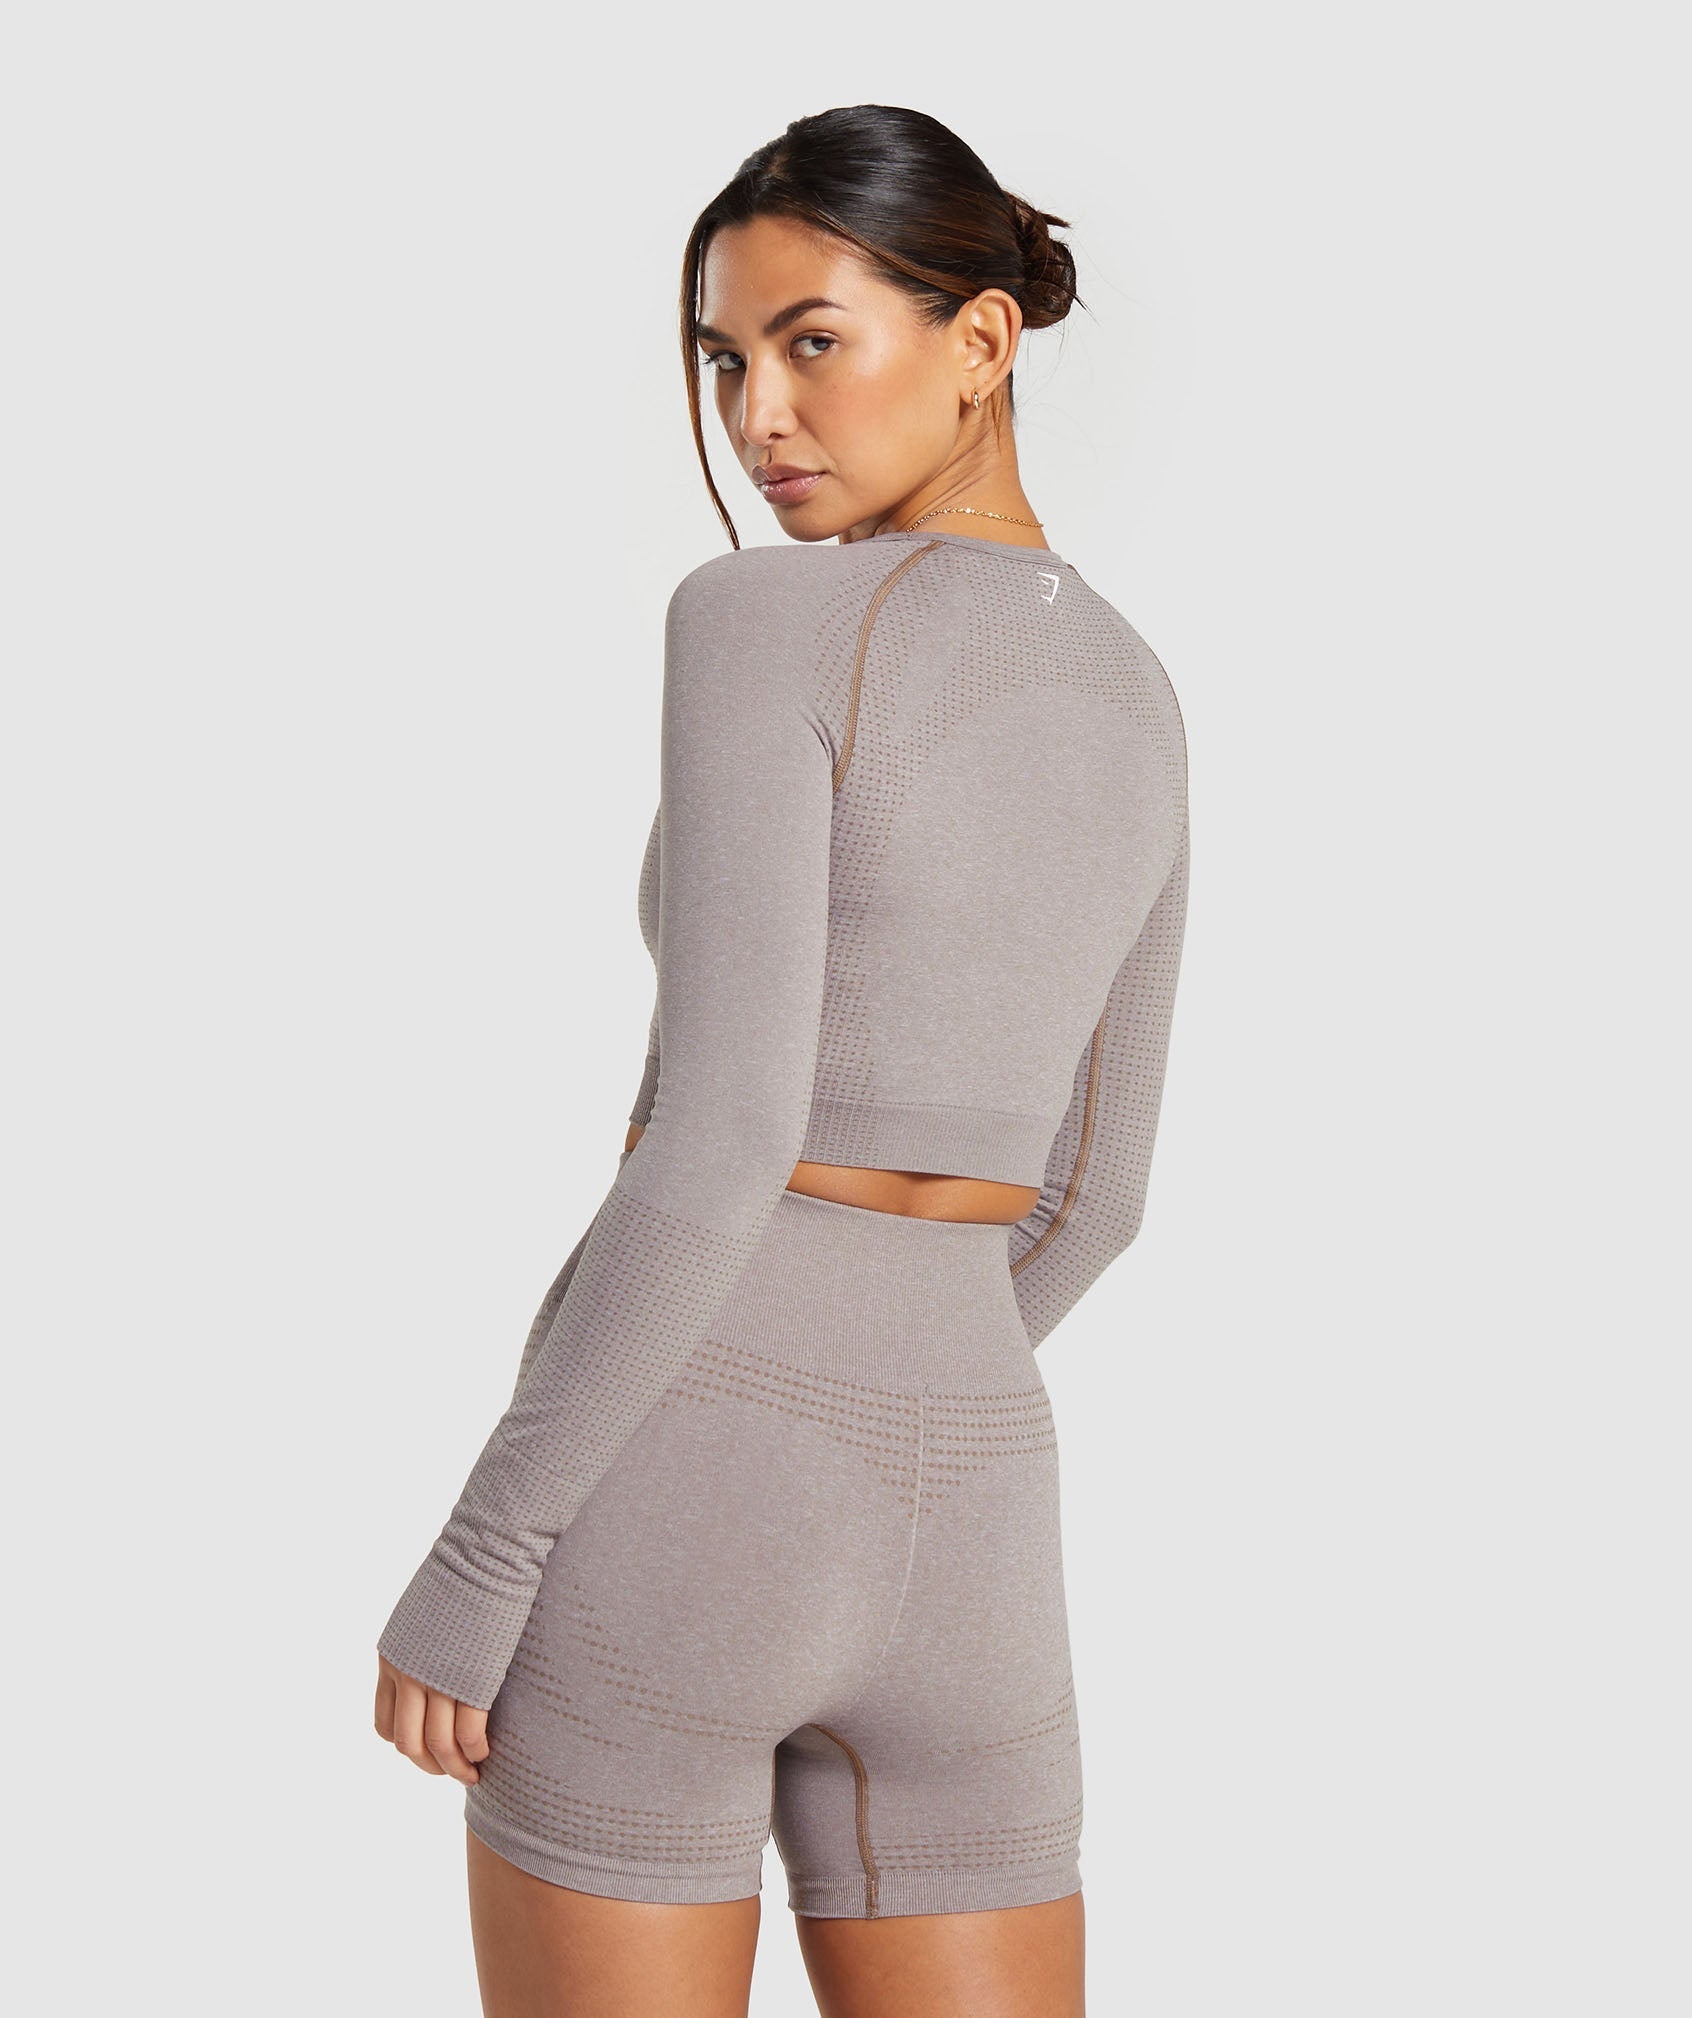 Vital Seamless 2.0 Crop Top in Warm Taupe Marl - view 2